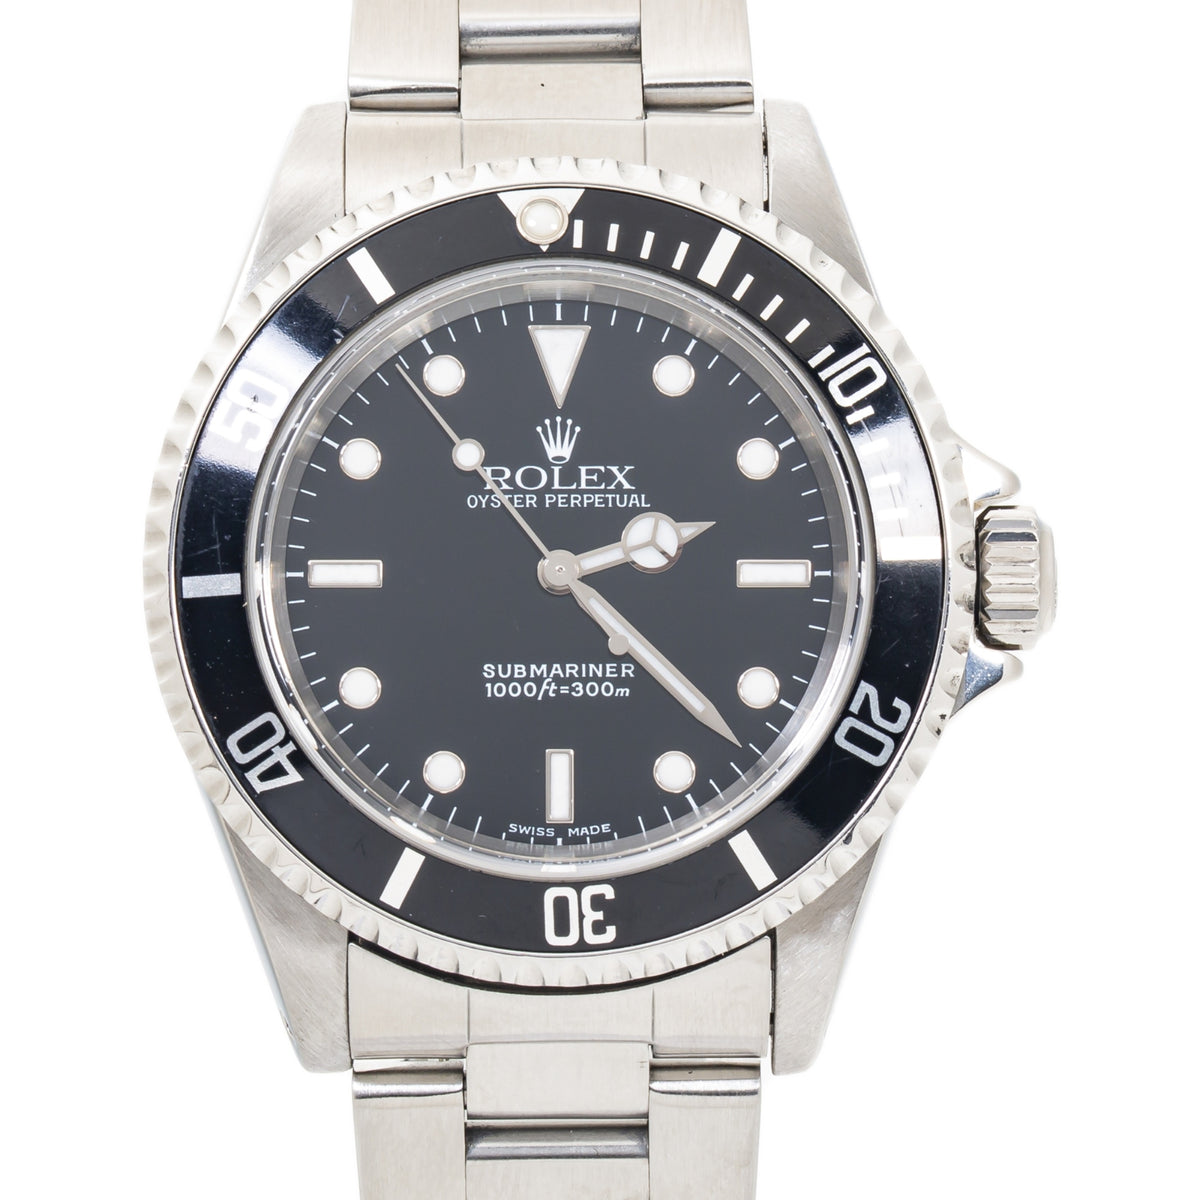 Rolex Submariner 14060 M Stainless Steel 2002 Automatic Watch 40mm with Paper